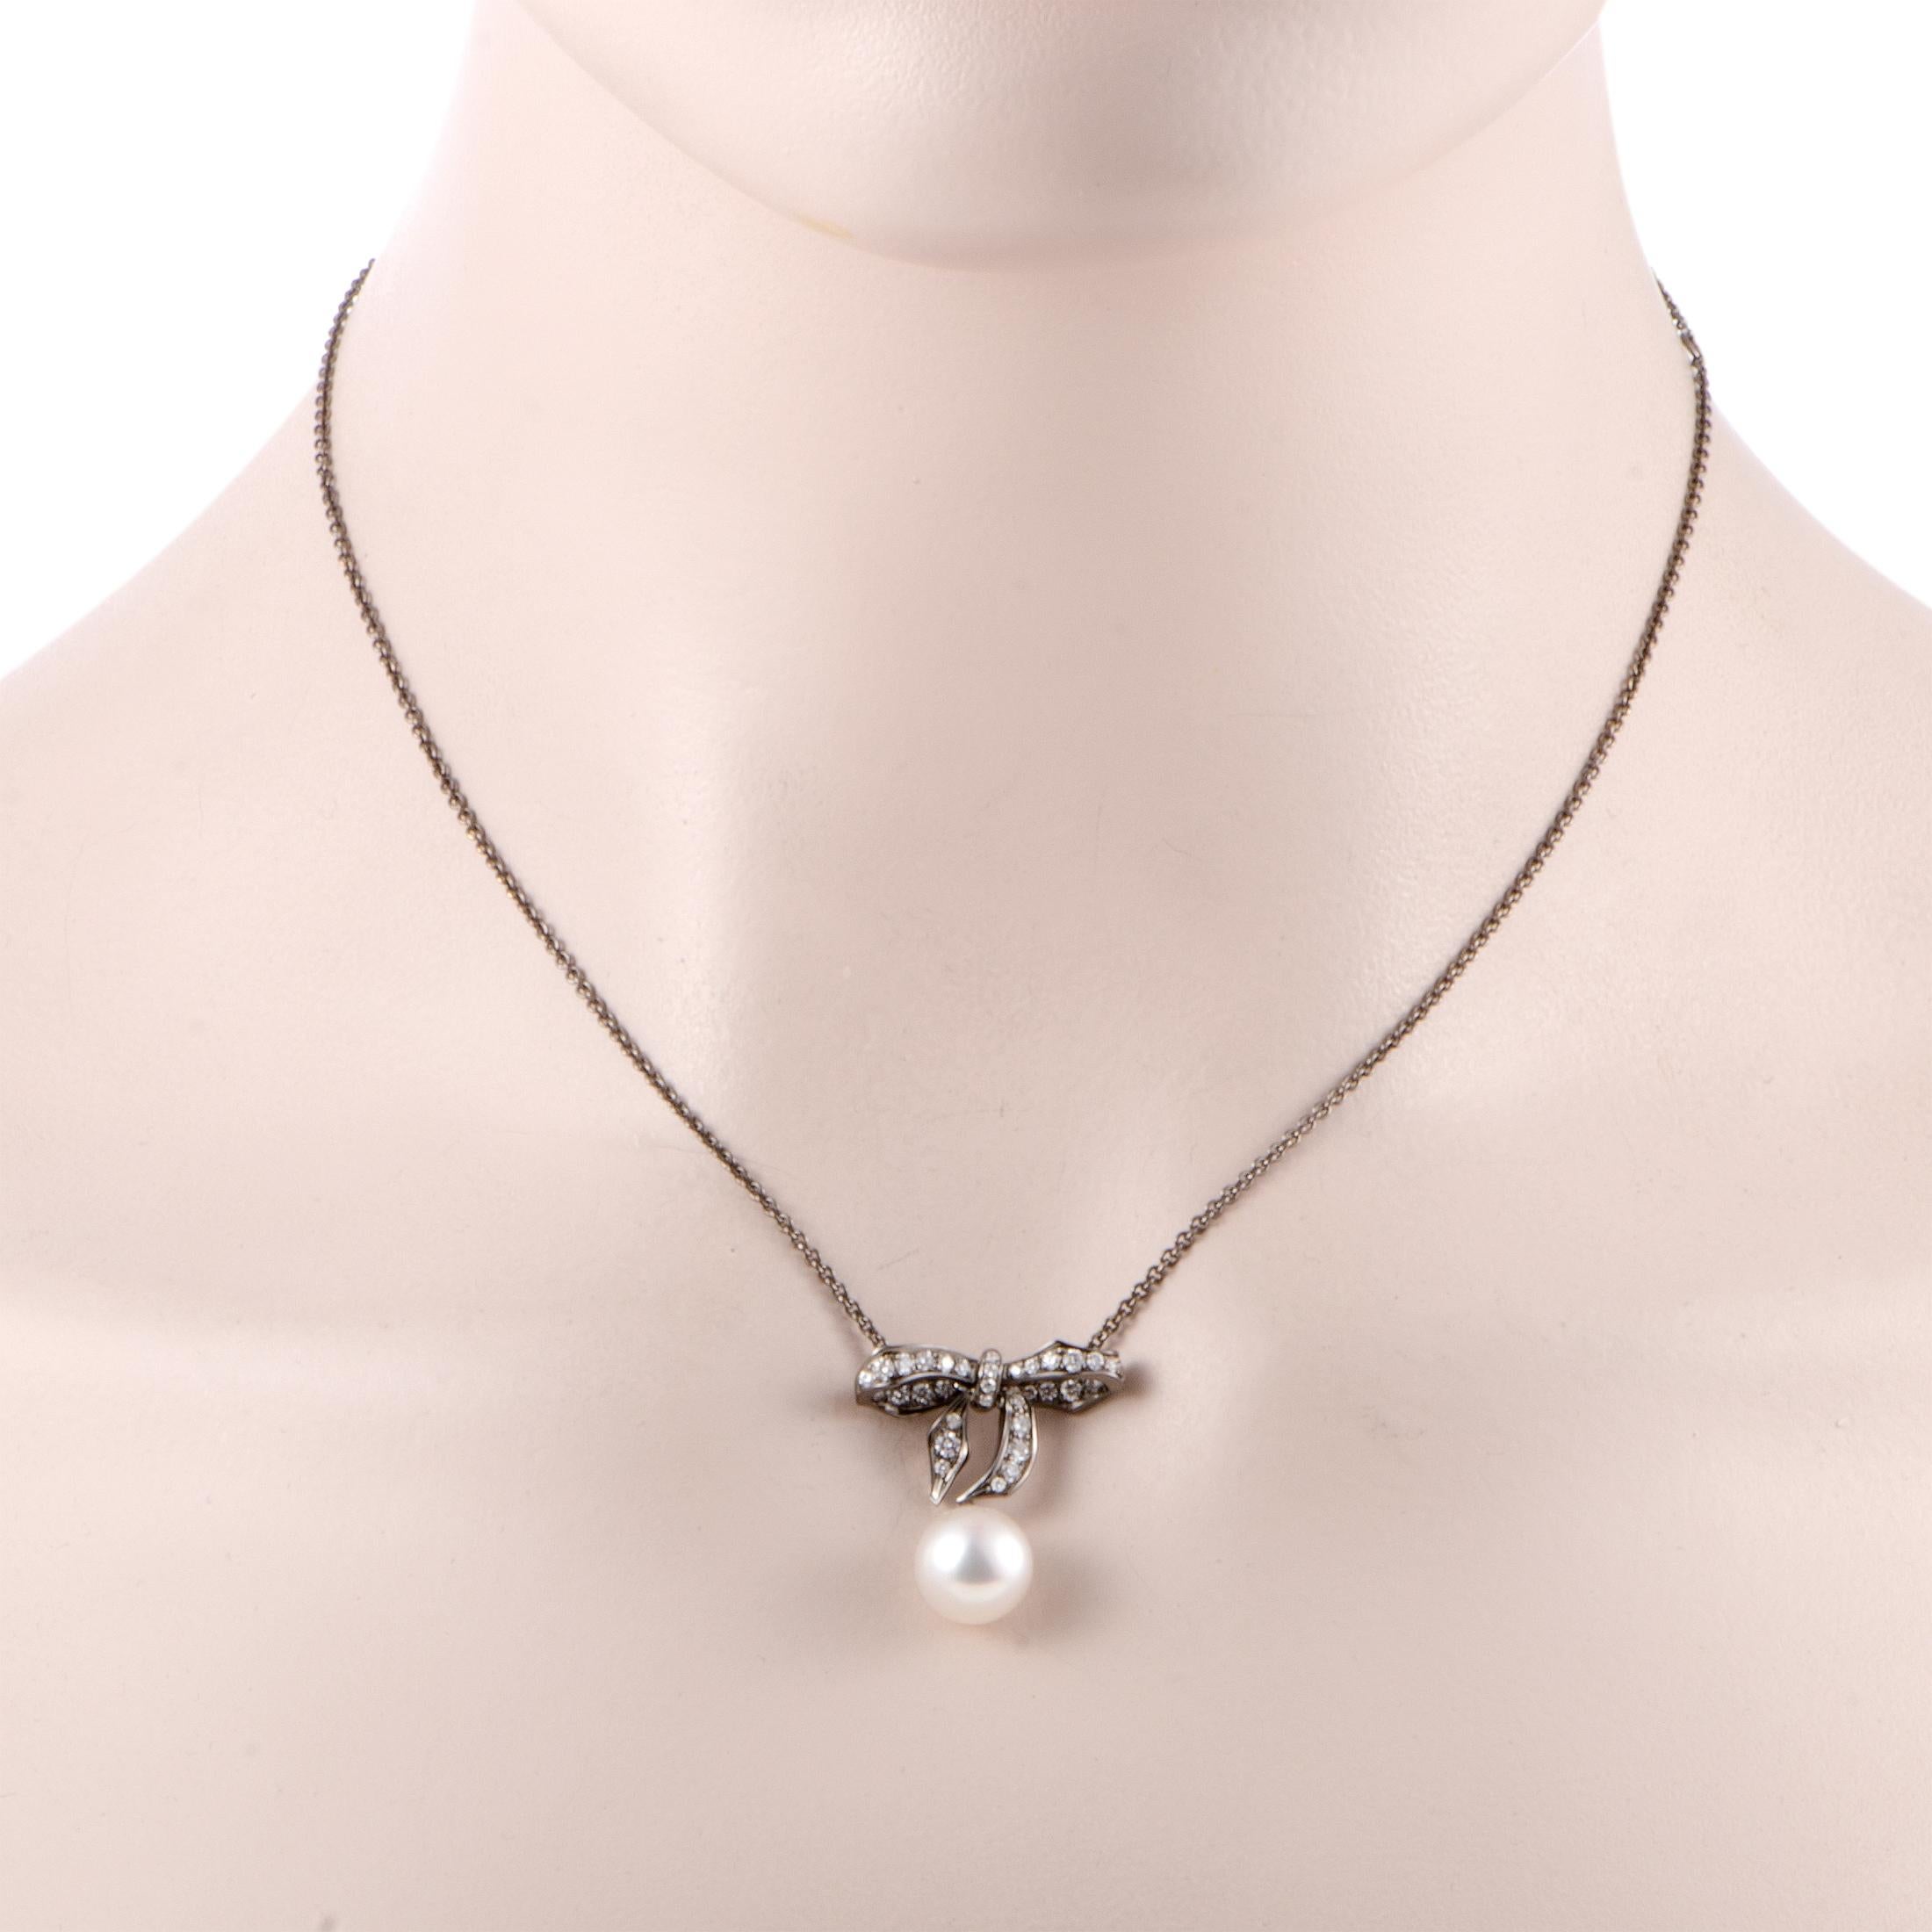 This stylish 18K white gold necklace by Mikimoto has a sublime aesthetic effect created by impeccable craftsmanship. Its pendant's extraordinarily spectacular design is accentuated by an adornment of scintillating diamonds, weighing 0.57ct, and an